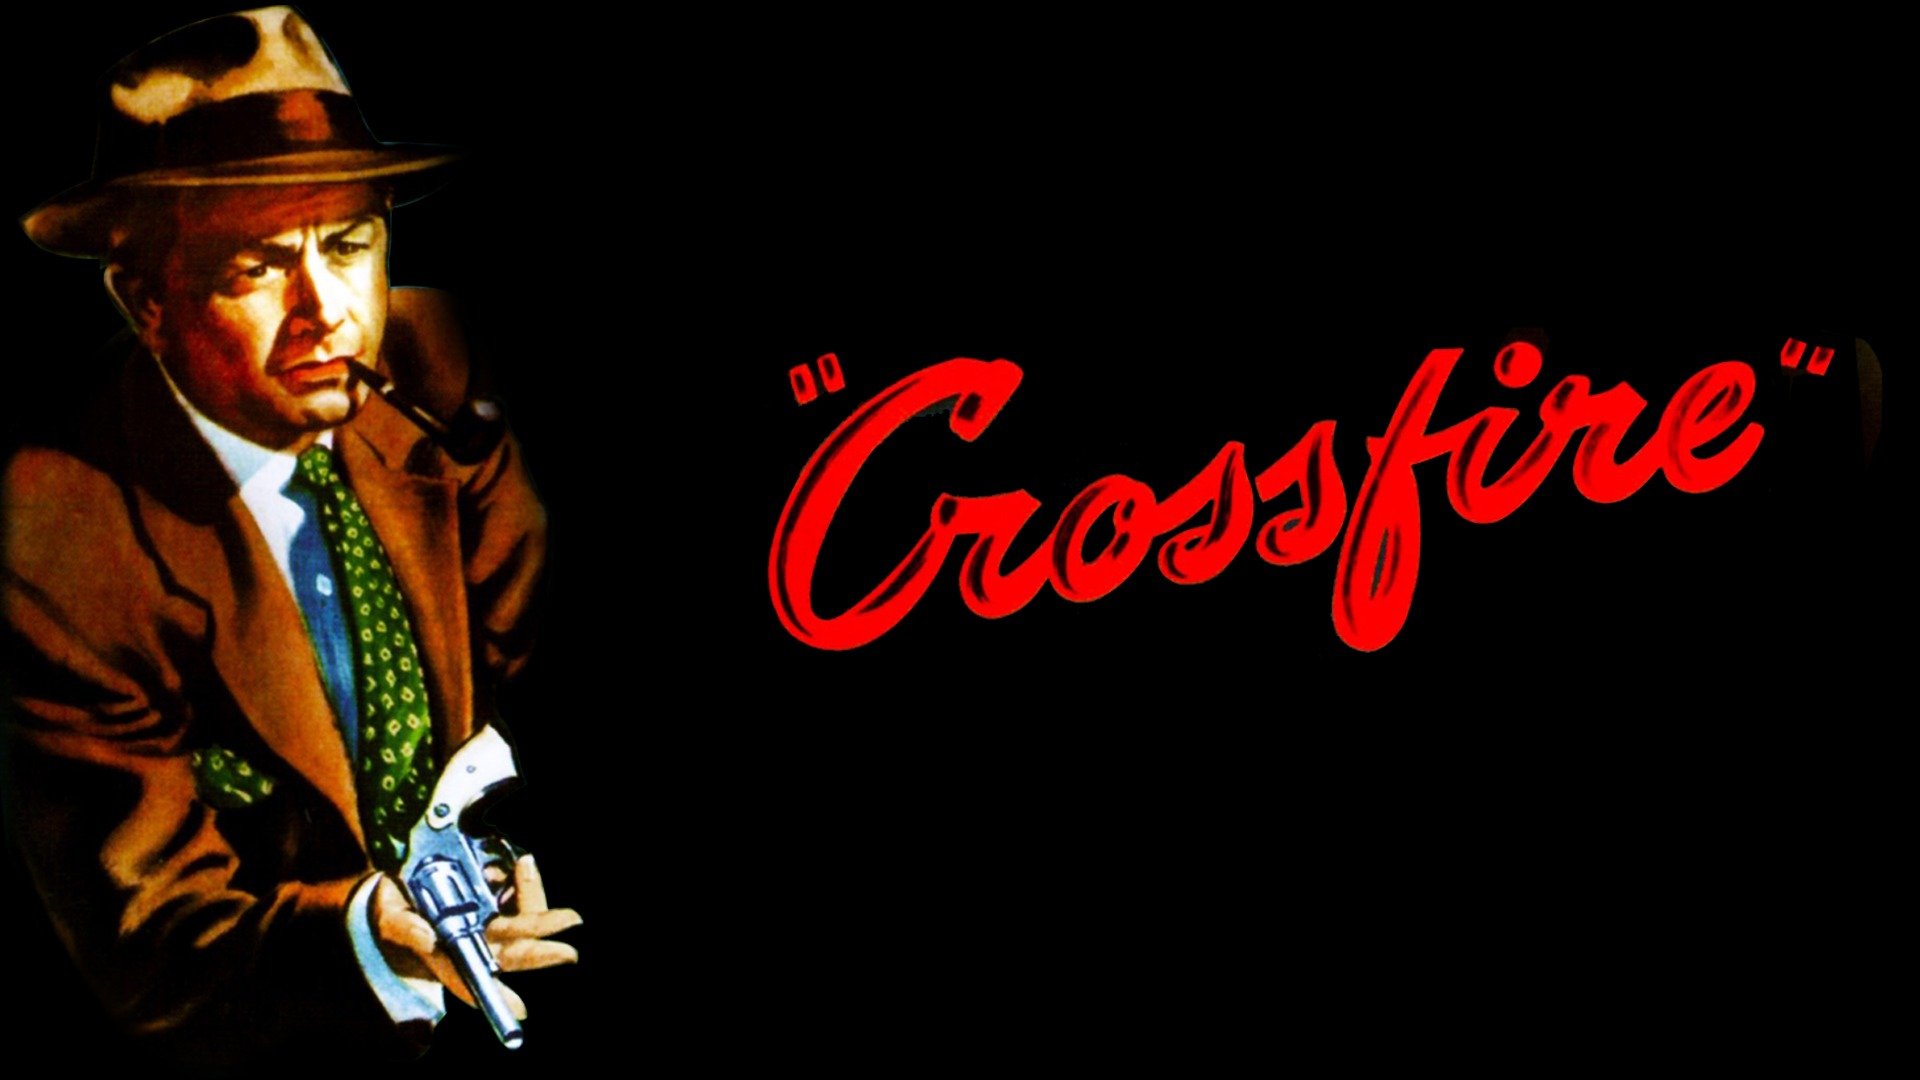 49-facts-about-the-movie-crossfire